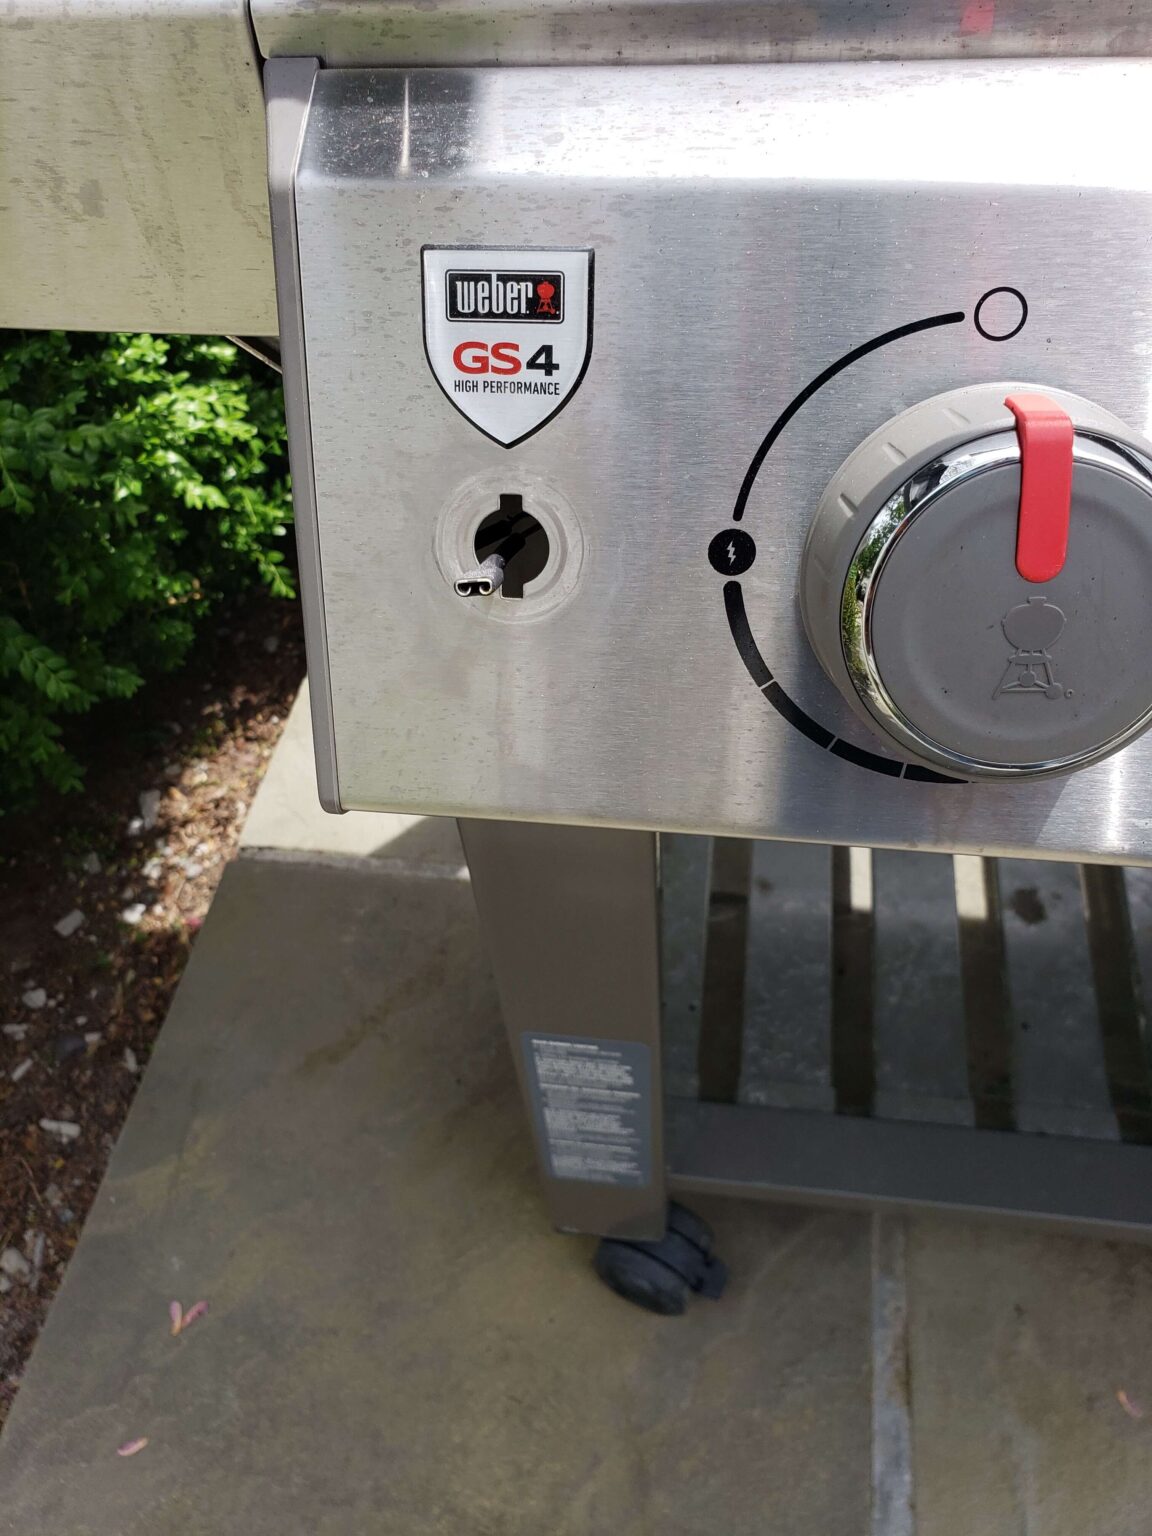 webber gas grill repairs houston